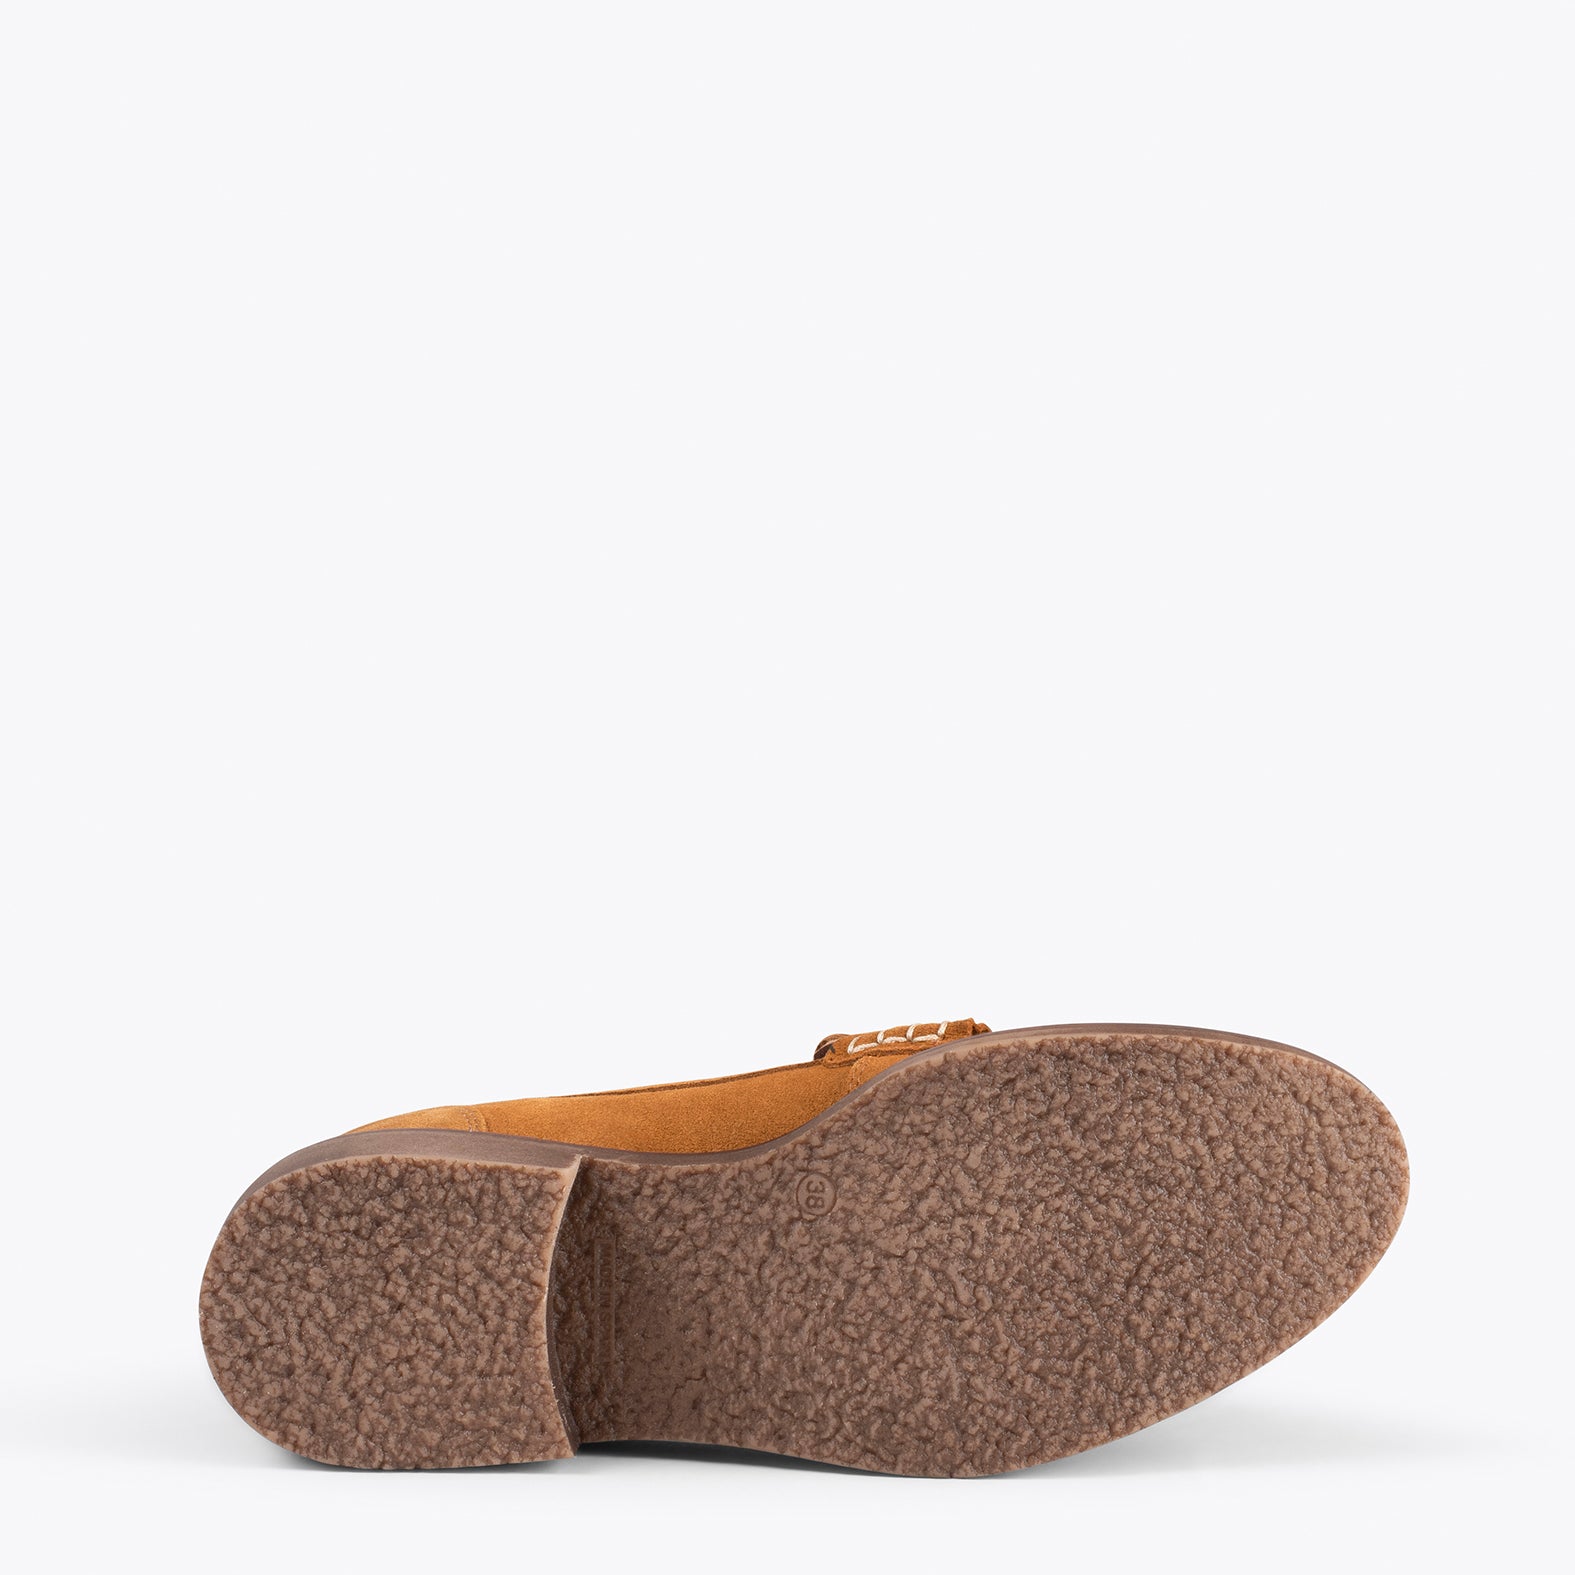 CASTELLANO – CAMEL moccasin with tassel